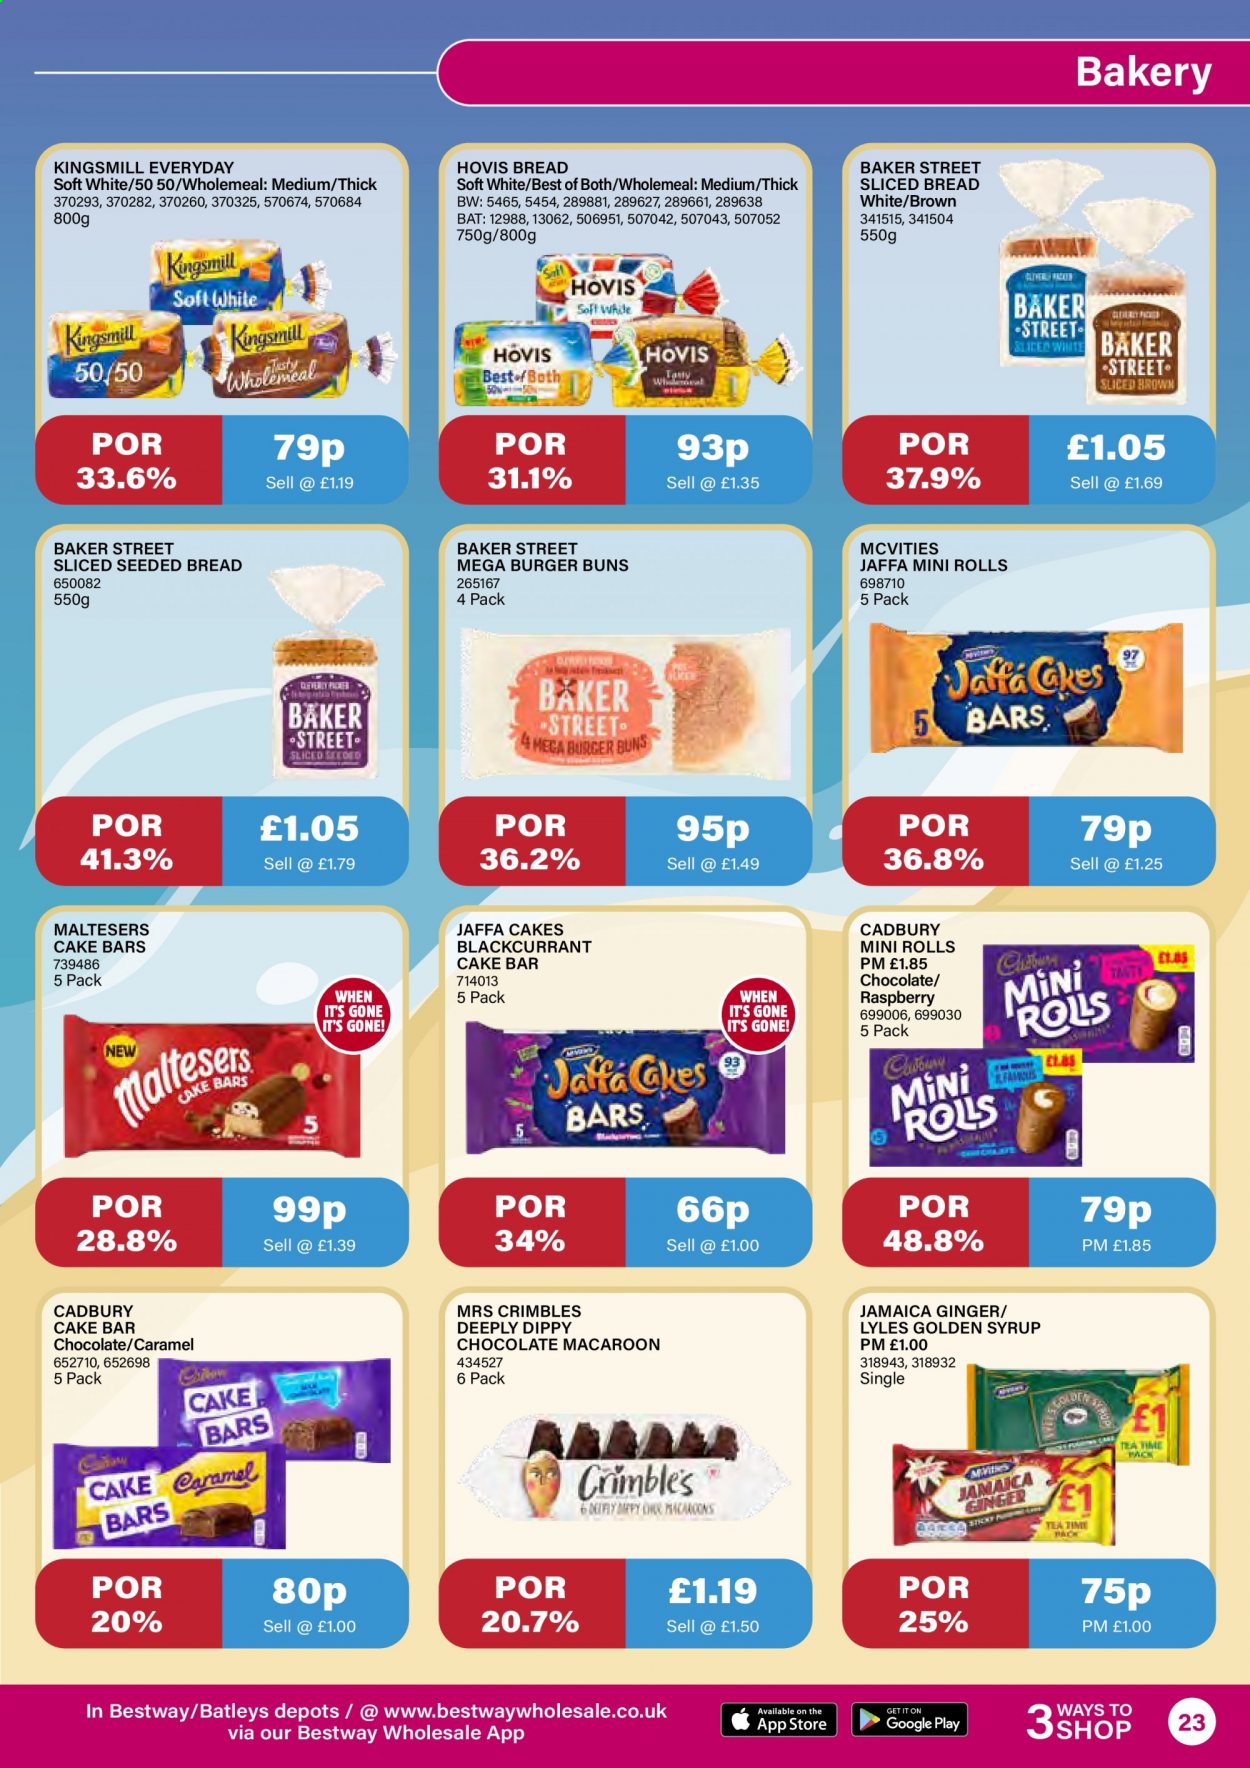 thumbnail - Bestway offer  - 16/07/2021 - 12/08/2021 - Sales products - ginger, bread, cake, buns, burger buns, chocolate, Cadbury, Maltesers, caramel, syrup, tea. Page 23.